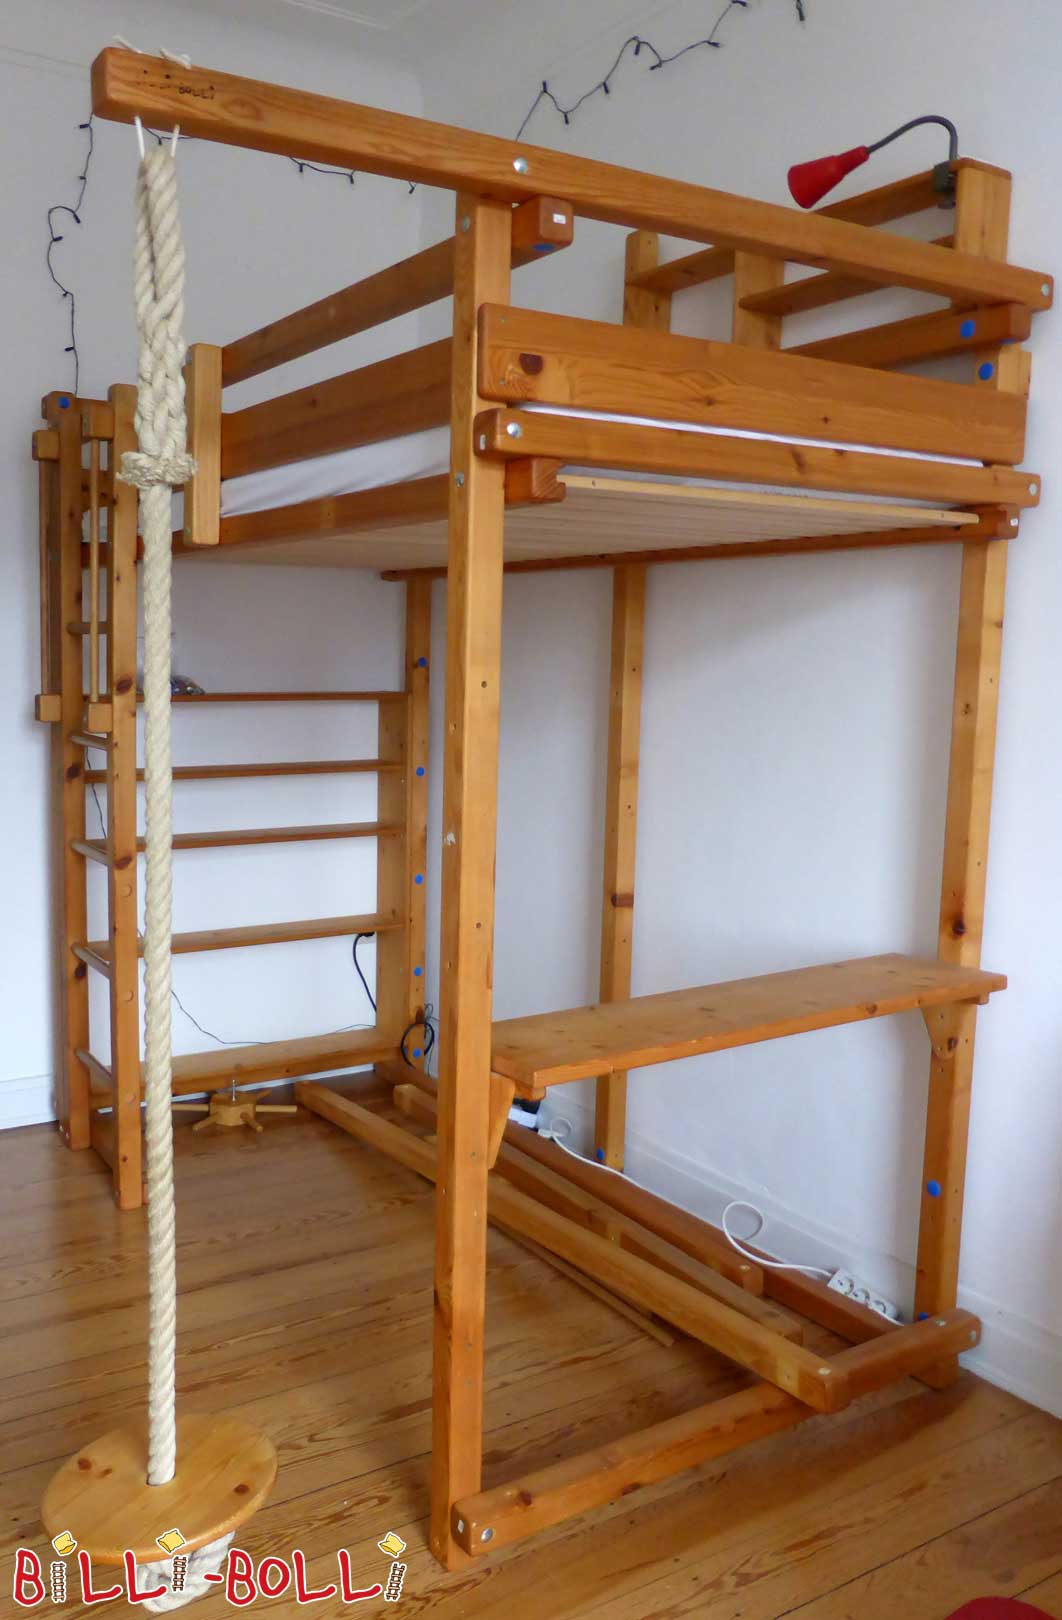 Billi-Bolli loft bed grows with the child (Category: second hand loft bed)